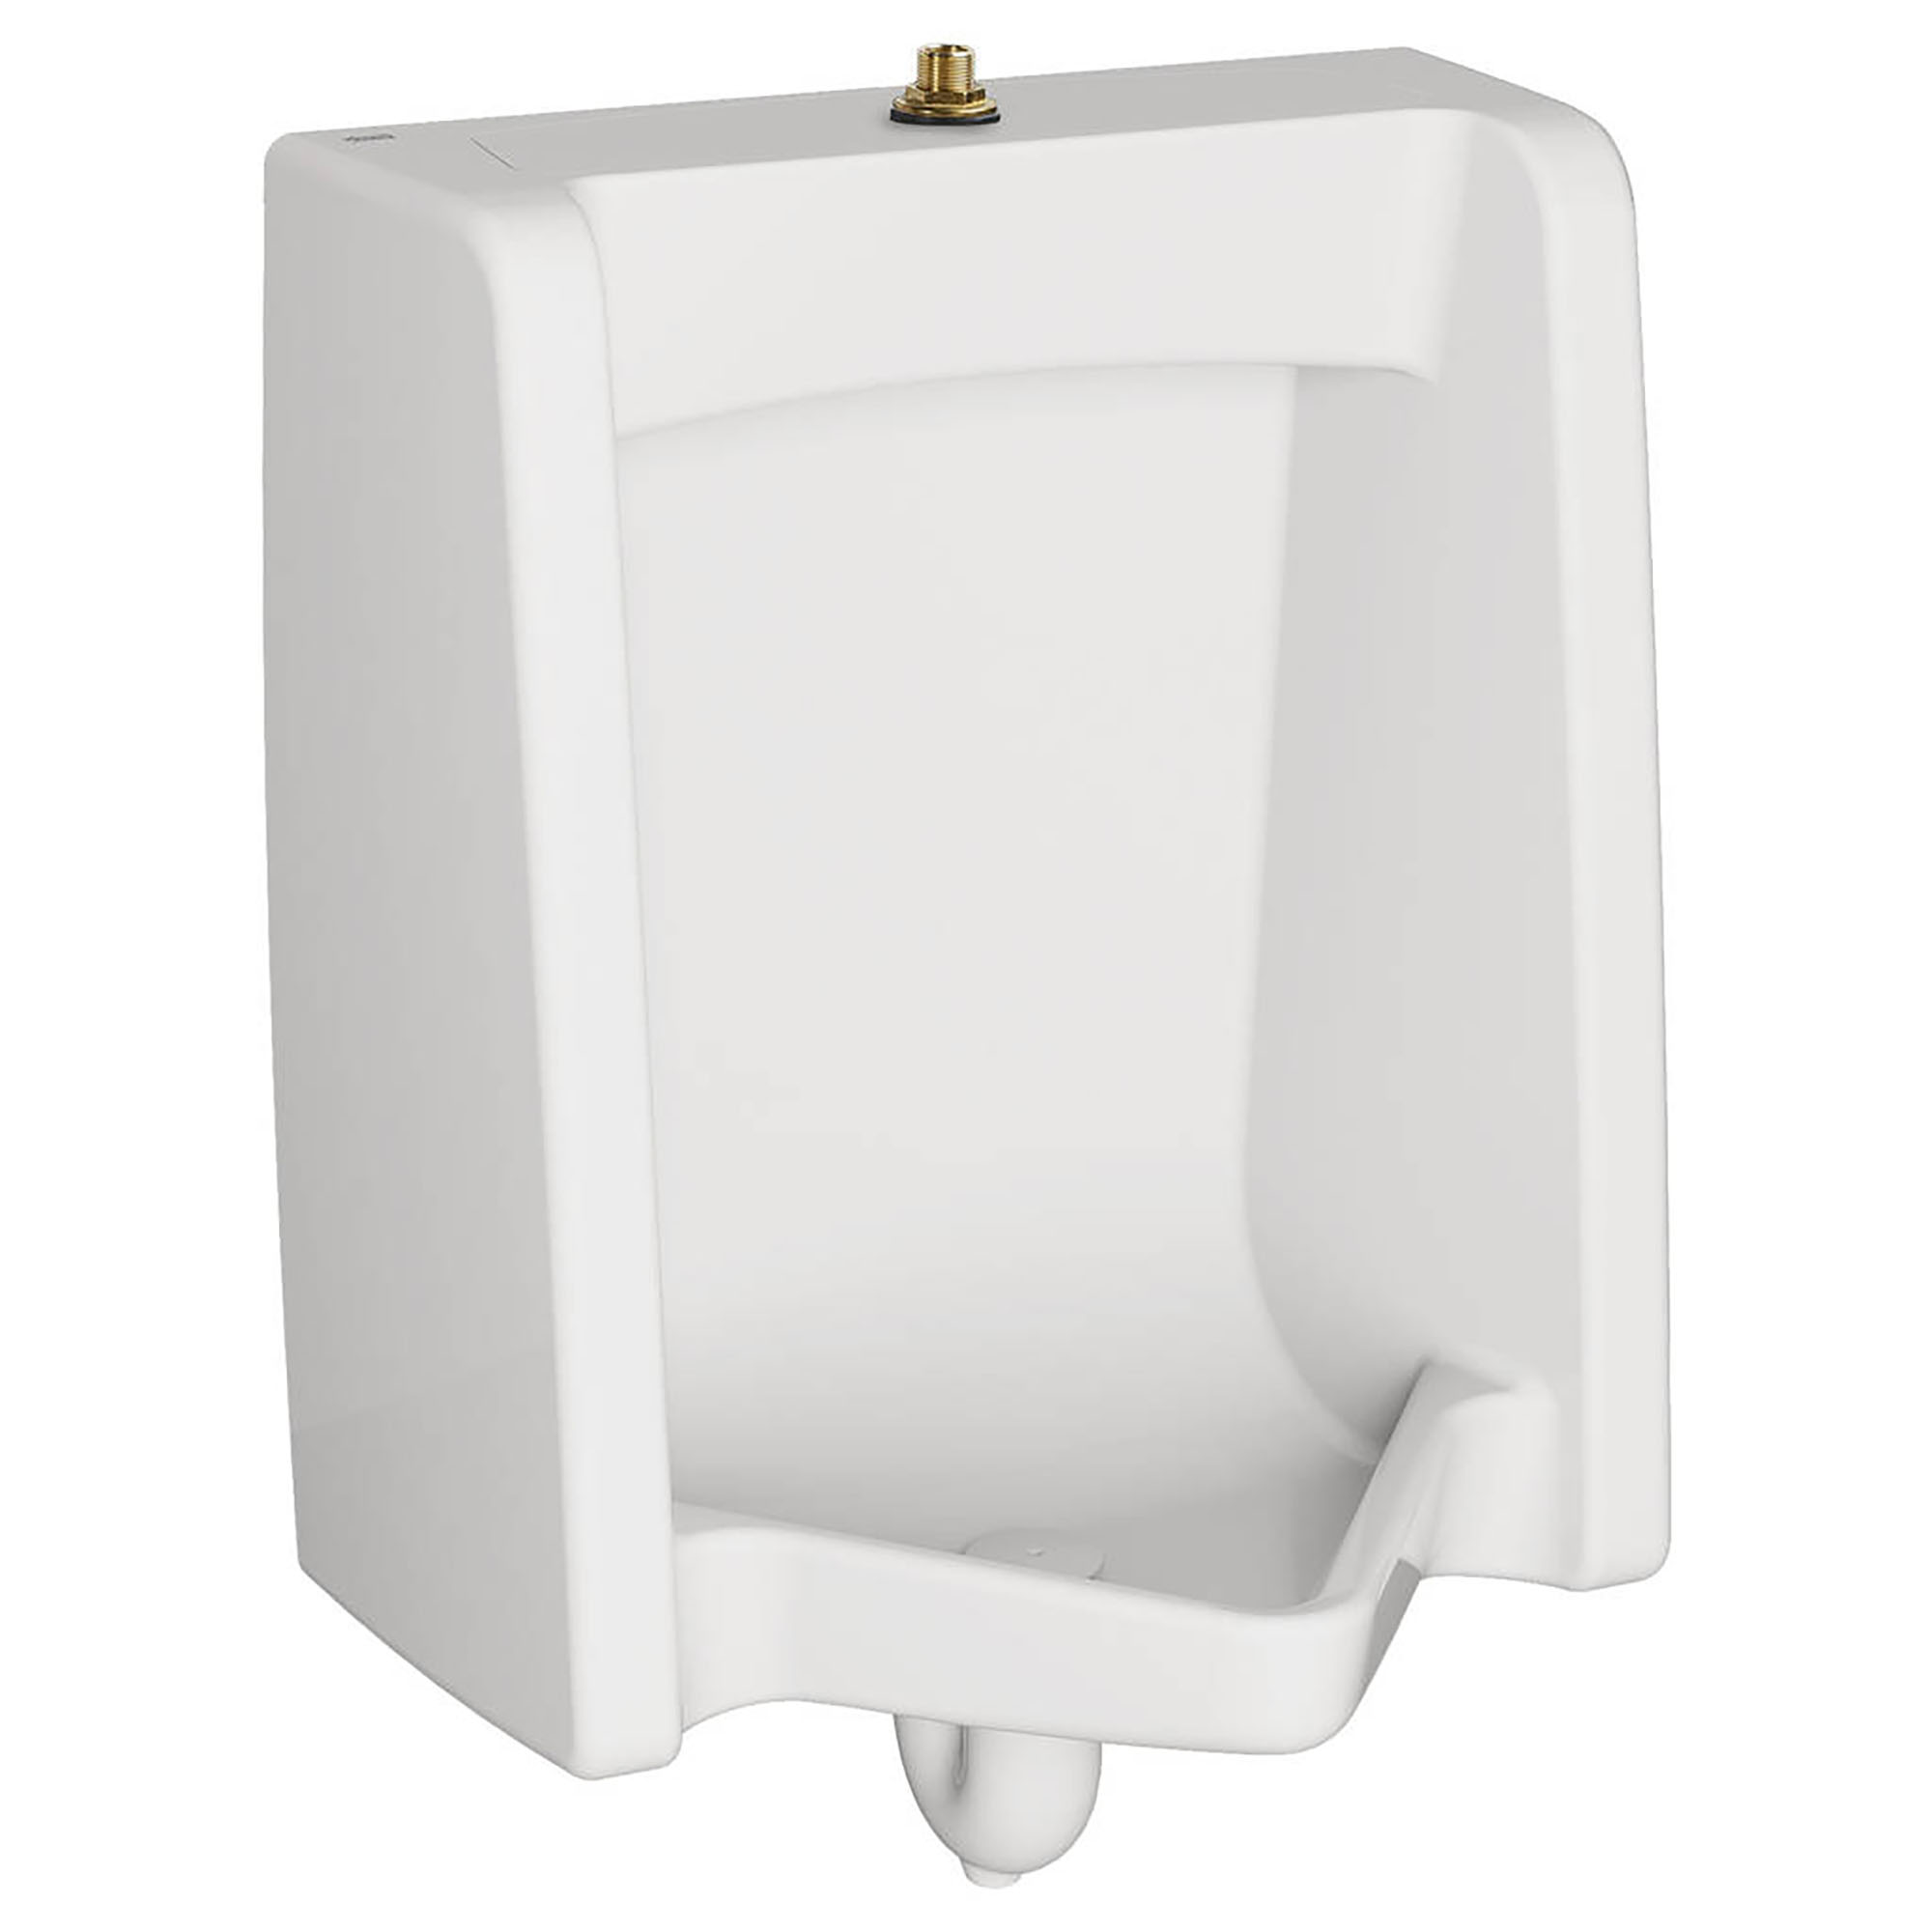 Washbrook® 0.125 – 1.0 gpf (0.47 – 3.8 Lpf) Top Spud Urinal with EverClean